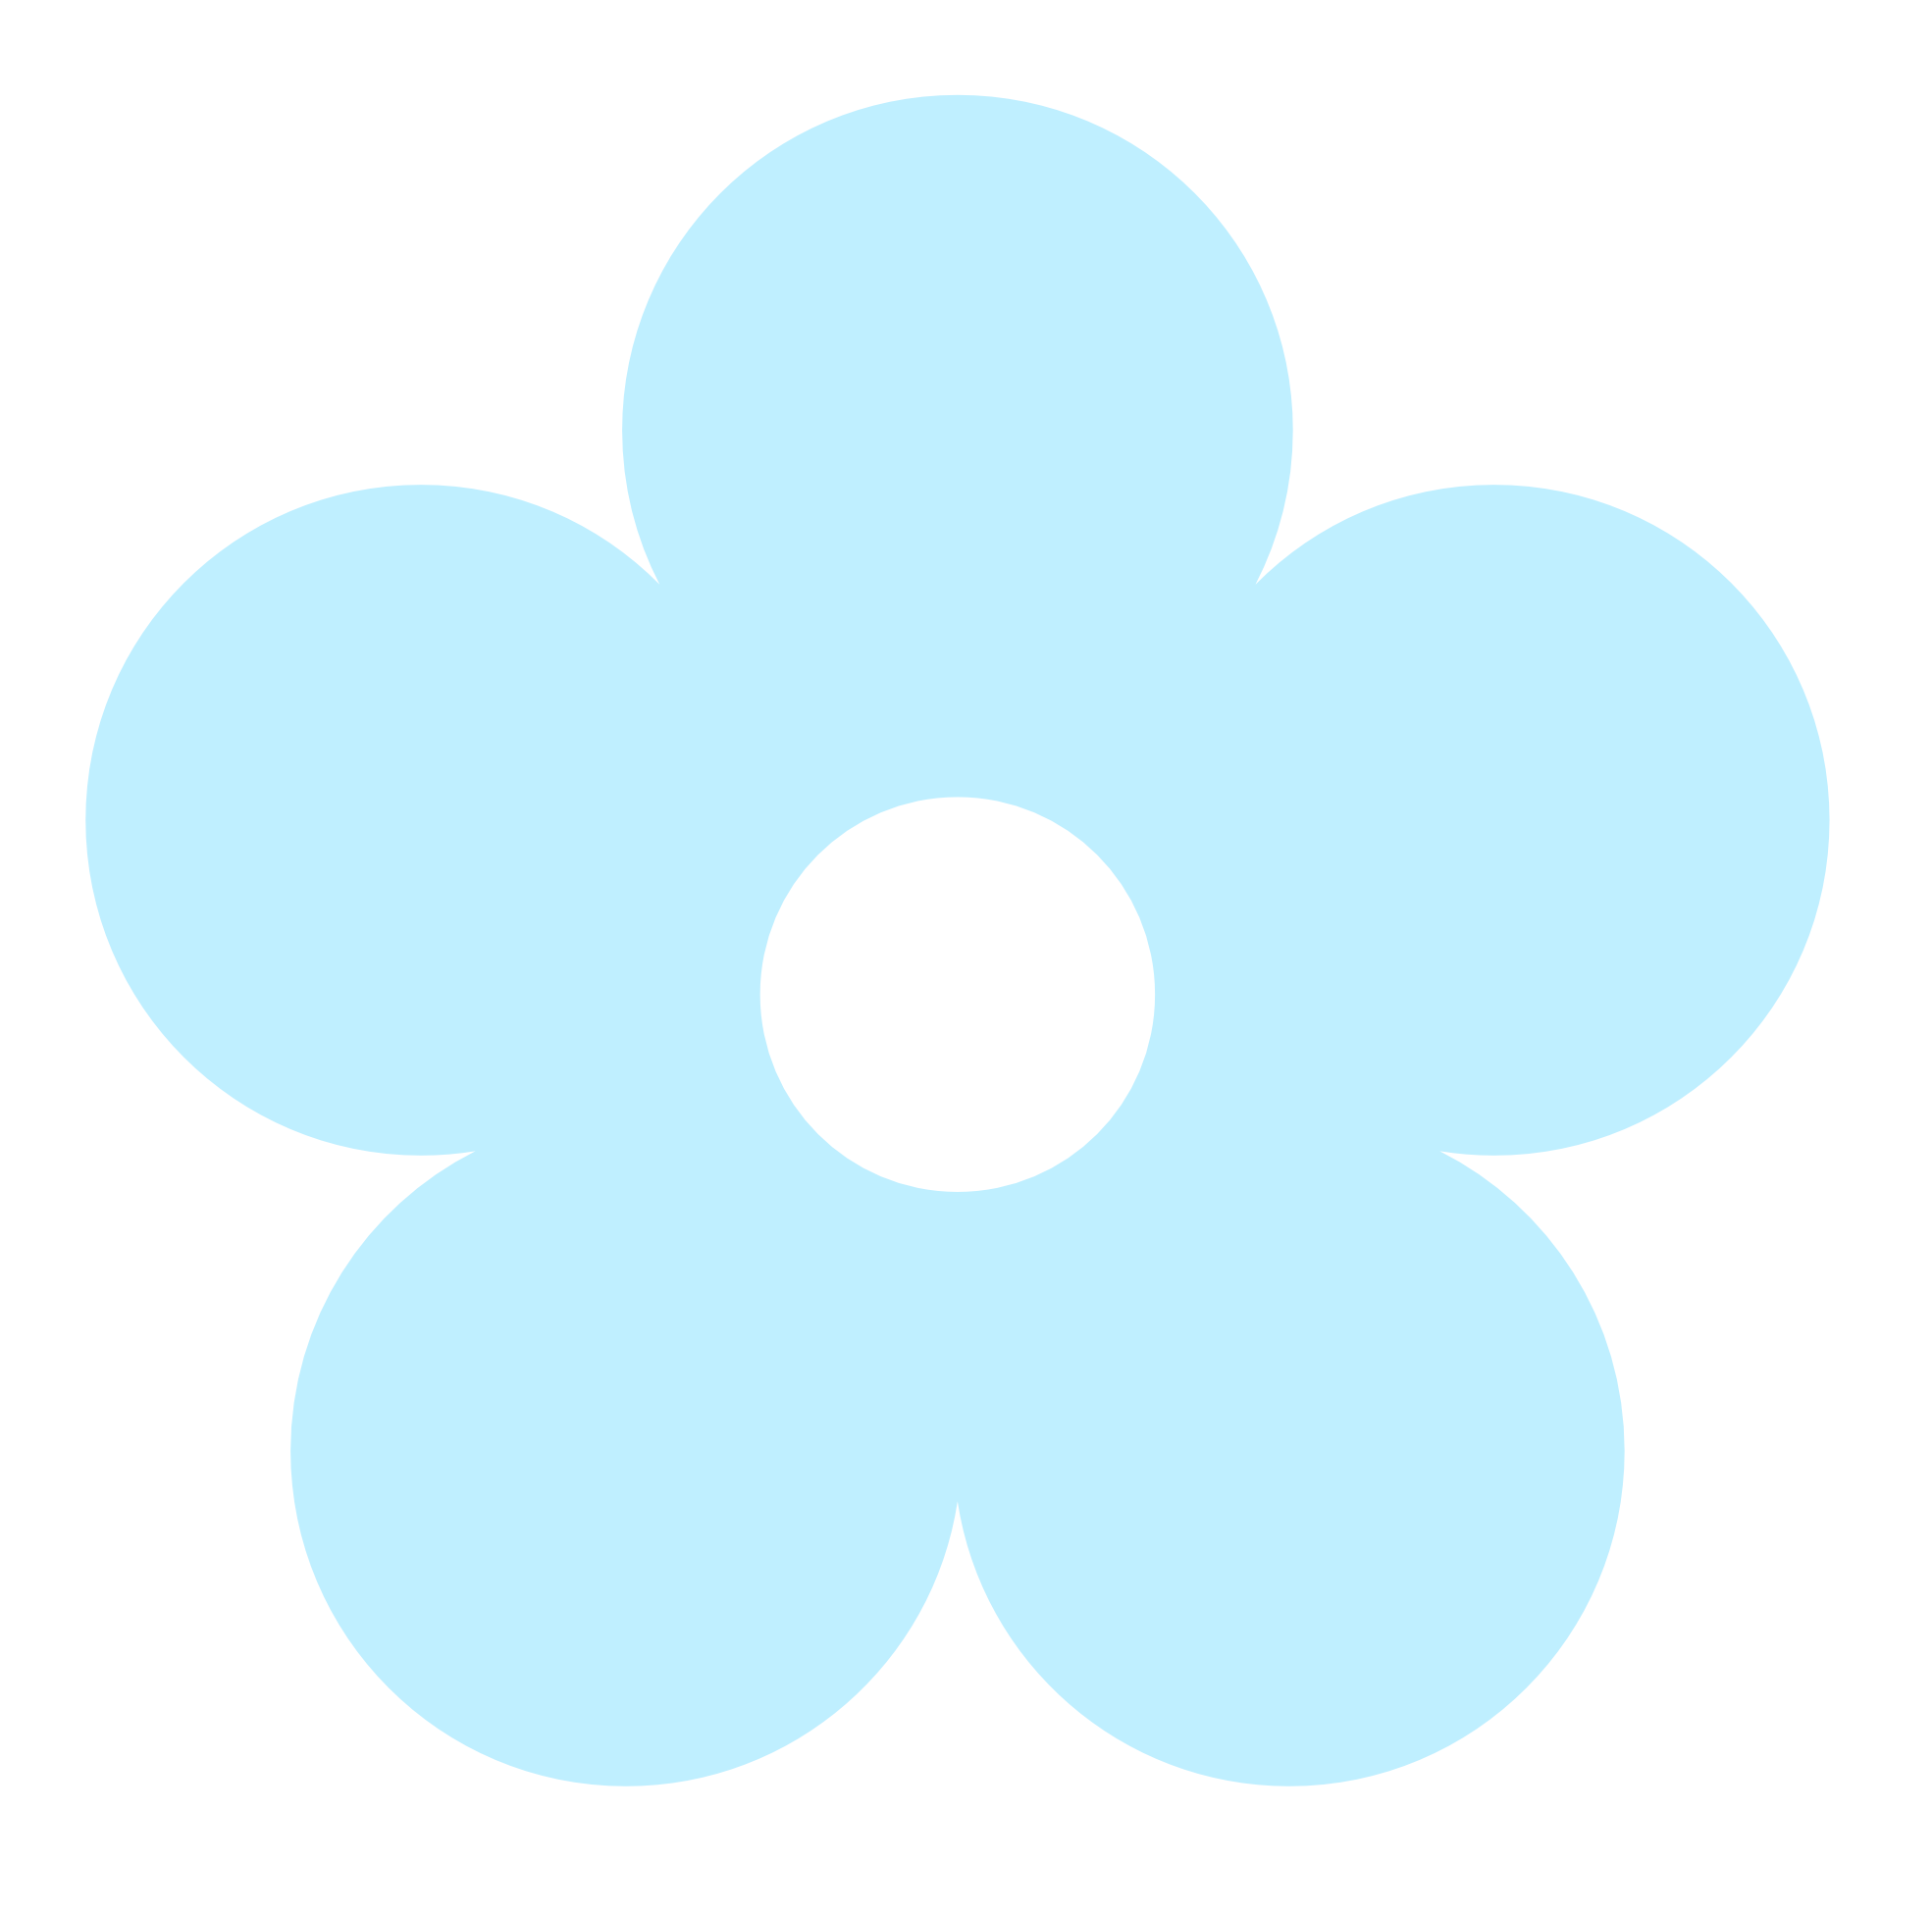 clipart flower coloring